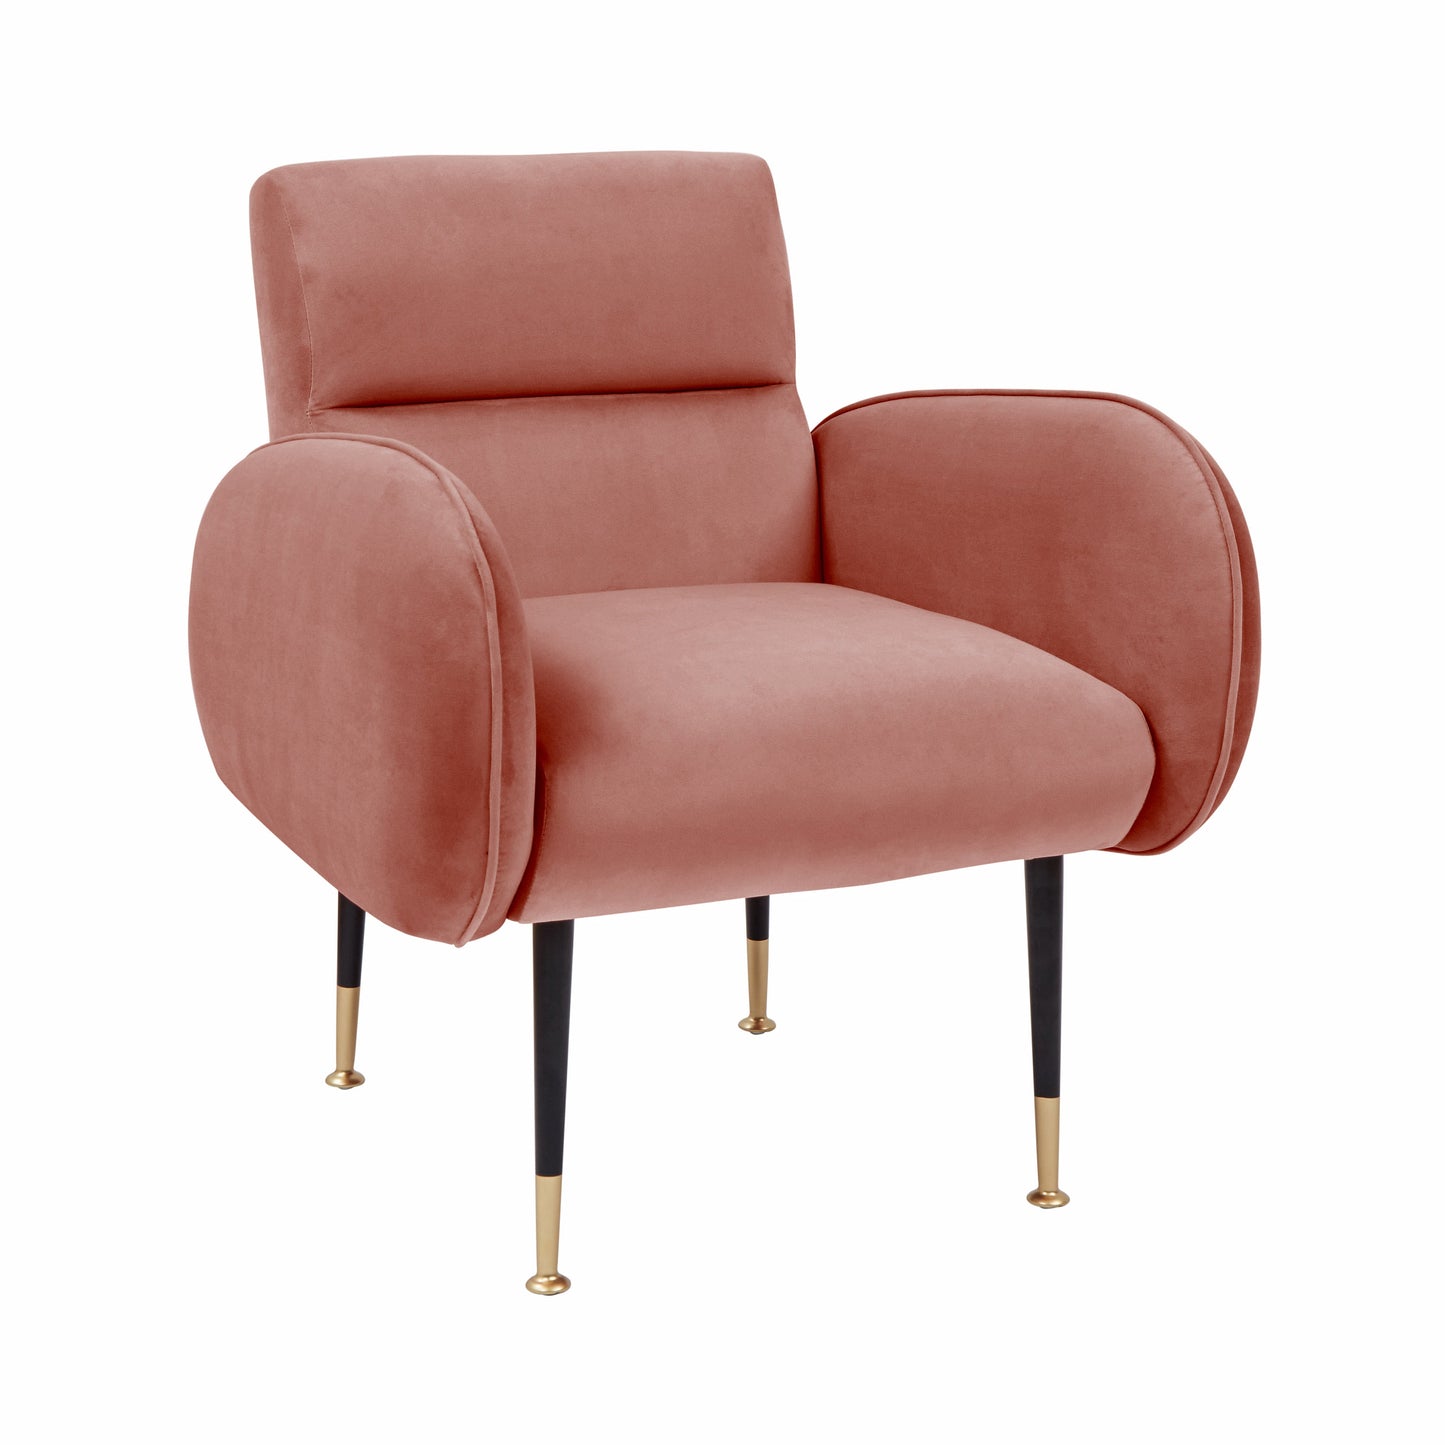 Load image into Gallery viewer, Babe Salmon Velvet Chair  OB OUTLET     Four Hands, Mid Century Modern Furniture, Old Bones Furniture Company, Old Bones Co, Modern Mid Century, Designer Furniture, https://www.oldbonesco.com/
